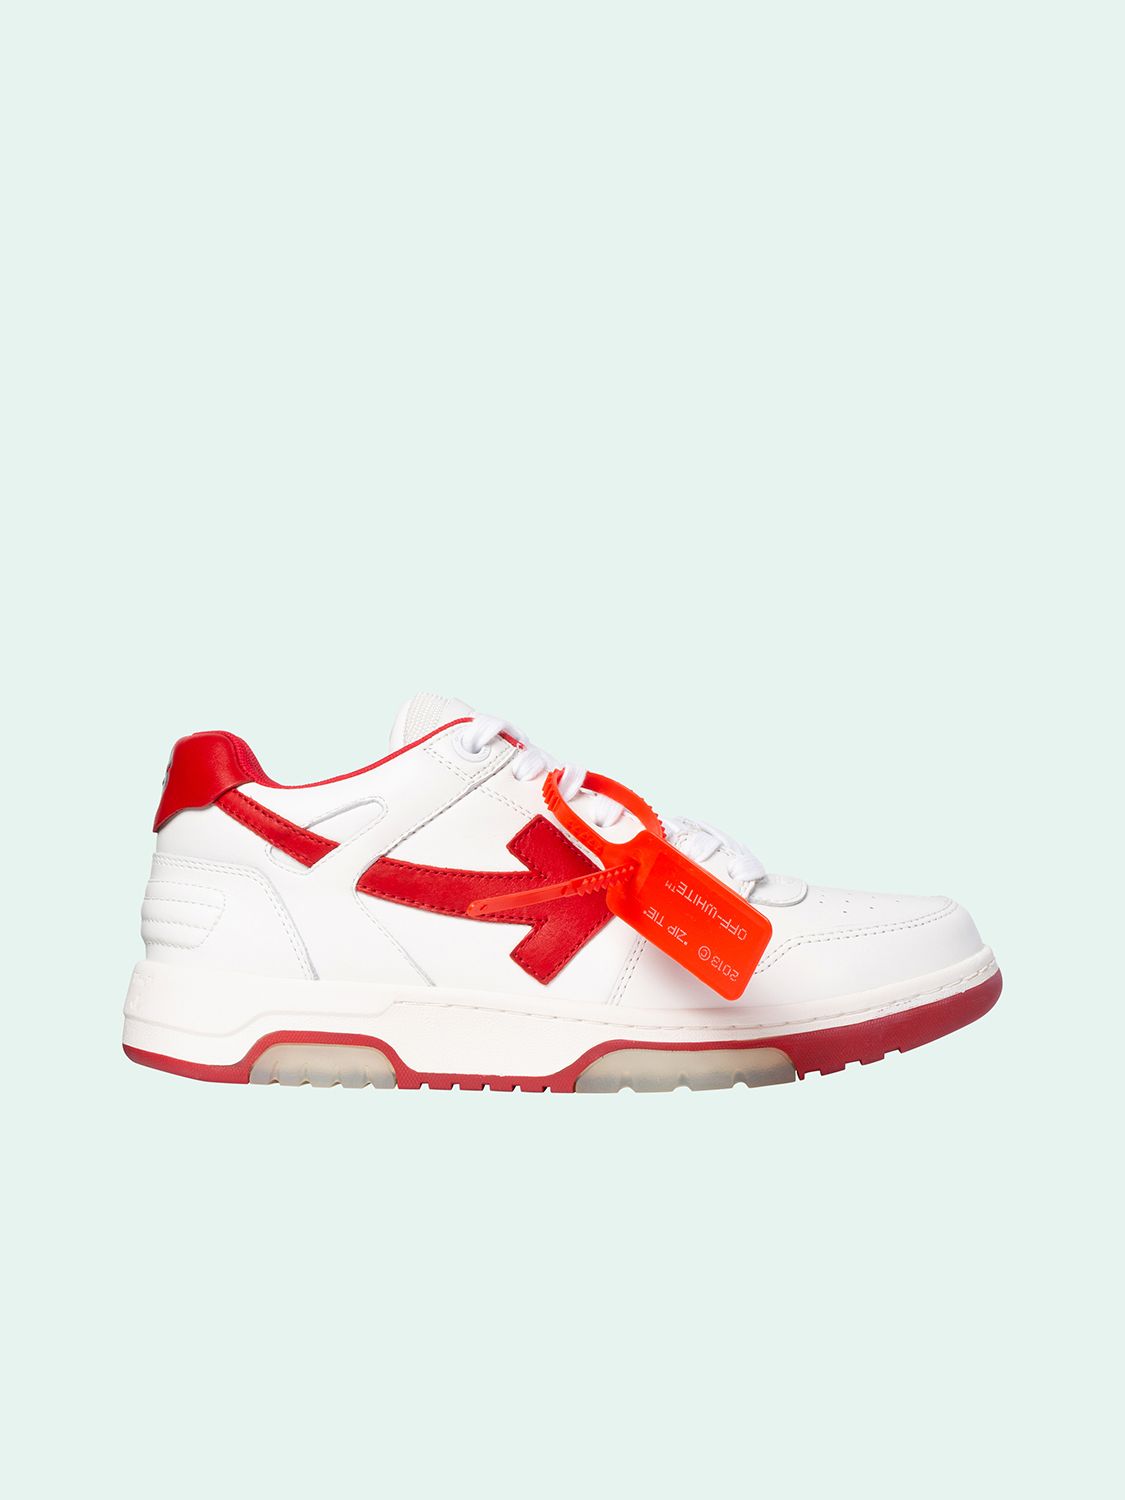 OFF-WHITE c/o VIRGIL ABLOH™の新作スニーカー『OUT OF OFFICE』